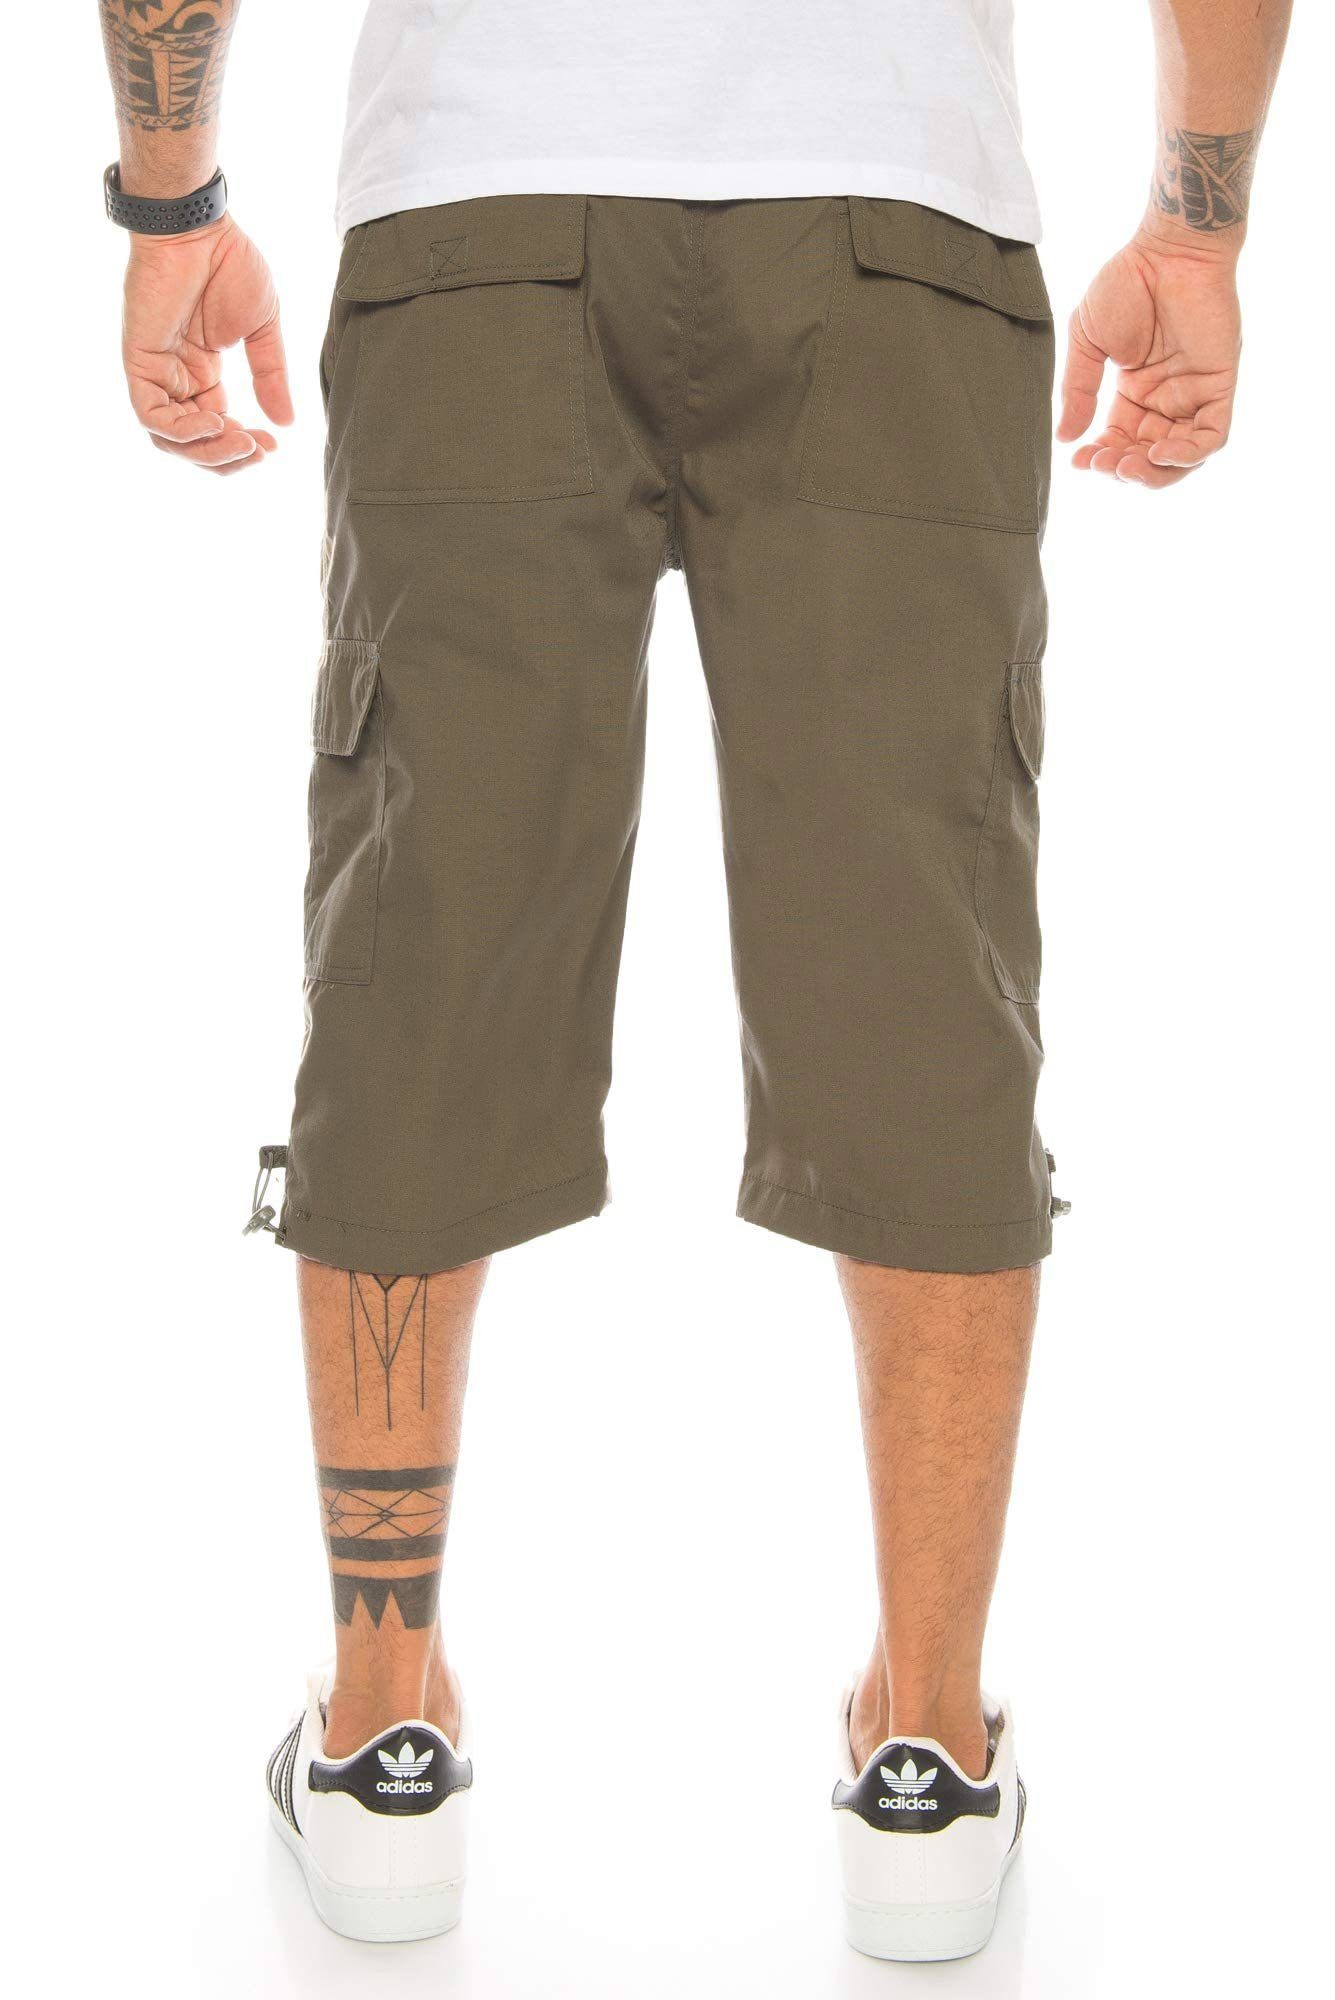 Kendindza Collection Cargoshorts Hose kurze Gummibund Hose Taschen, Cargoshorts 3/4 Herren, Herren Herren Cargo Olive Hose Bermudas Kurze Herren Herren Stretch Sommer